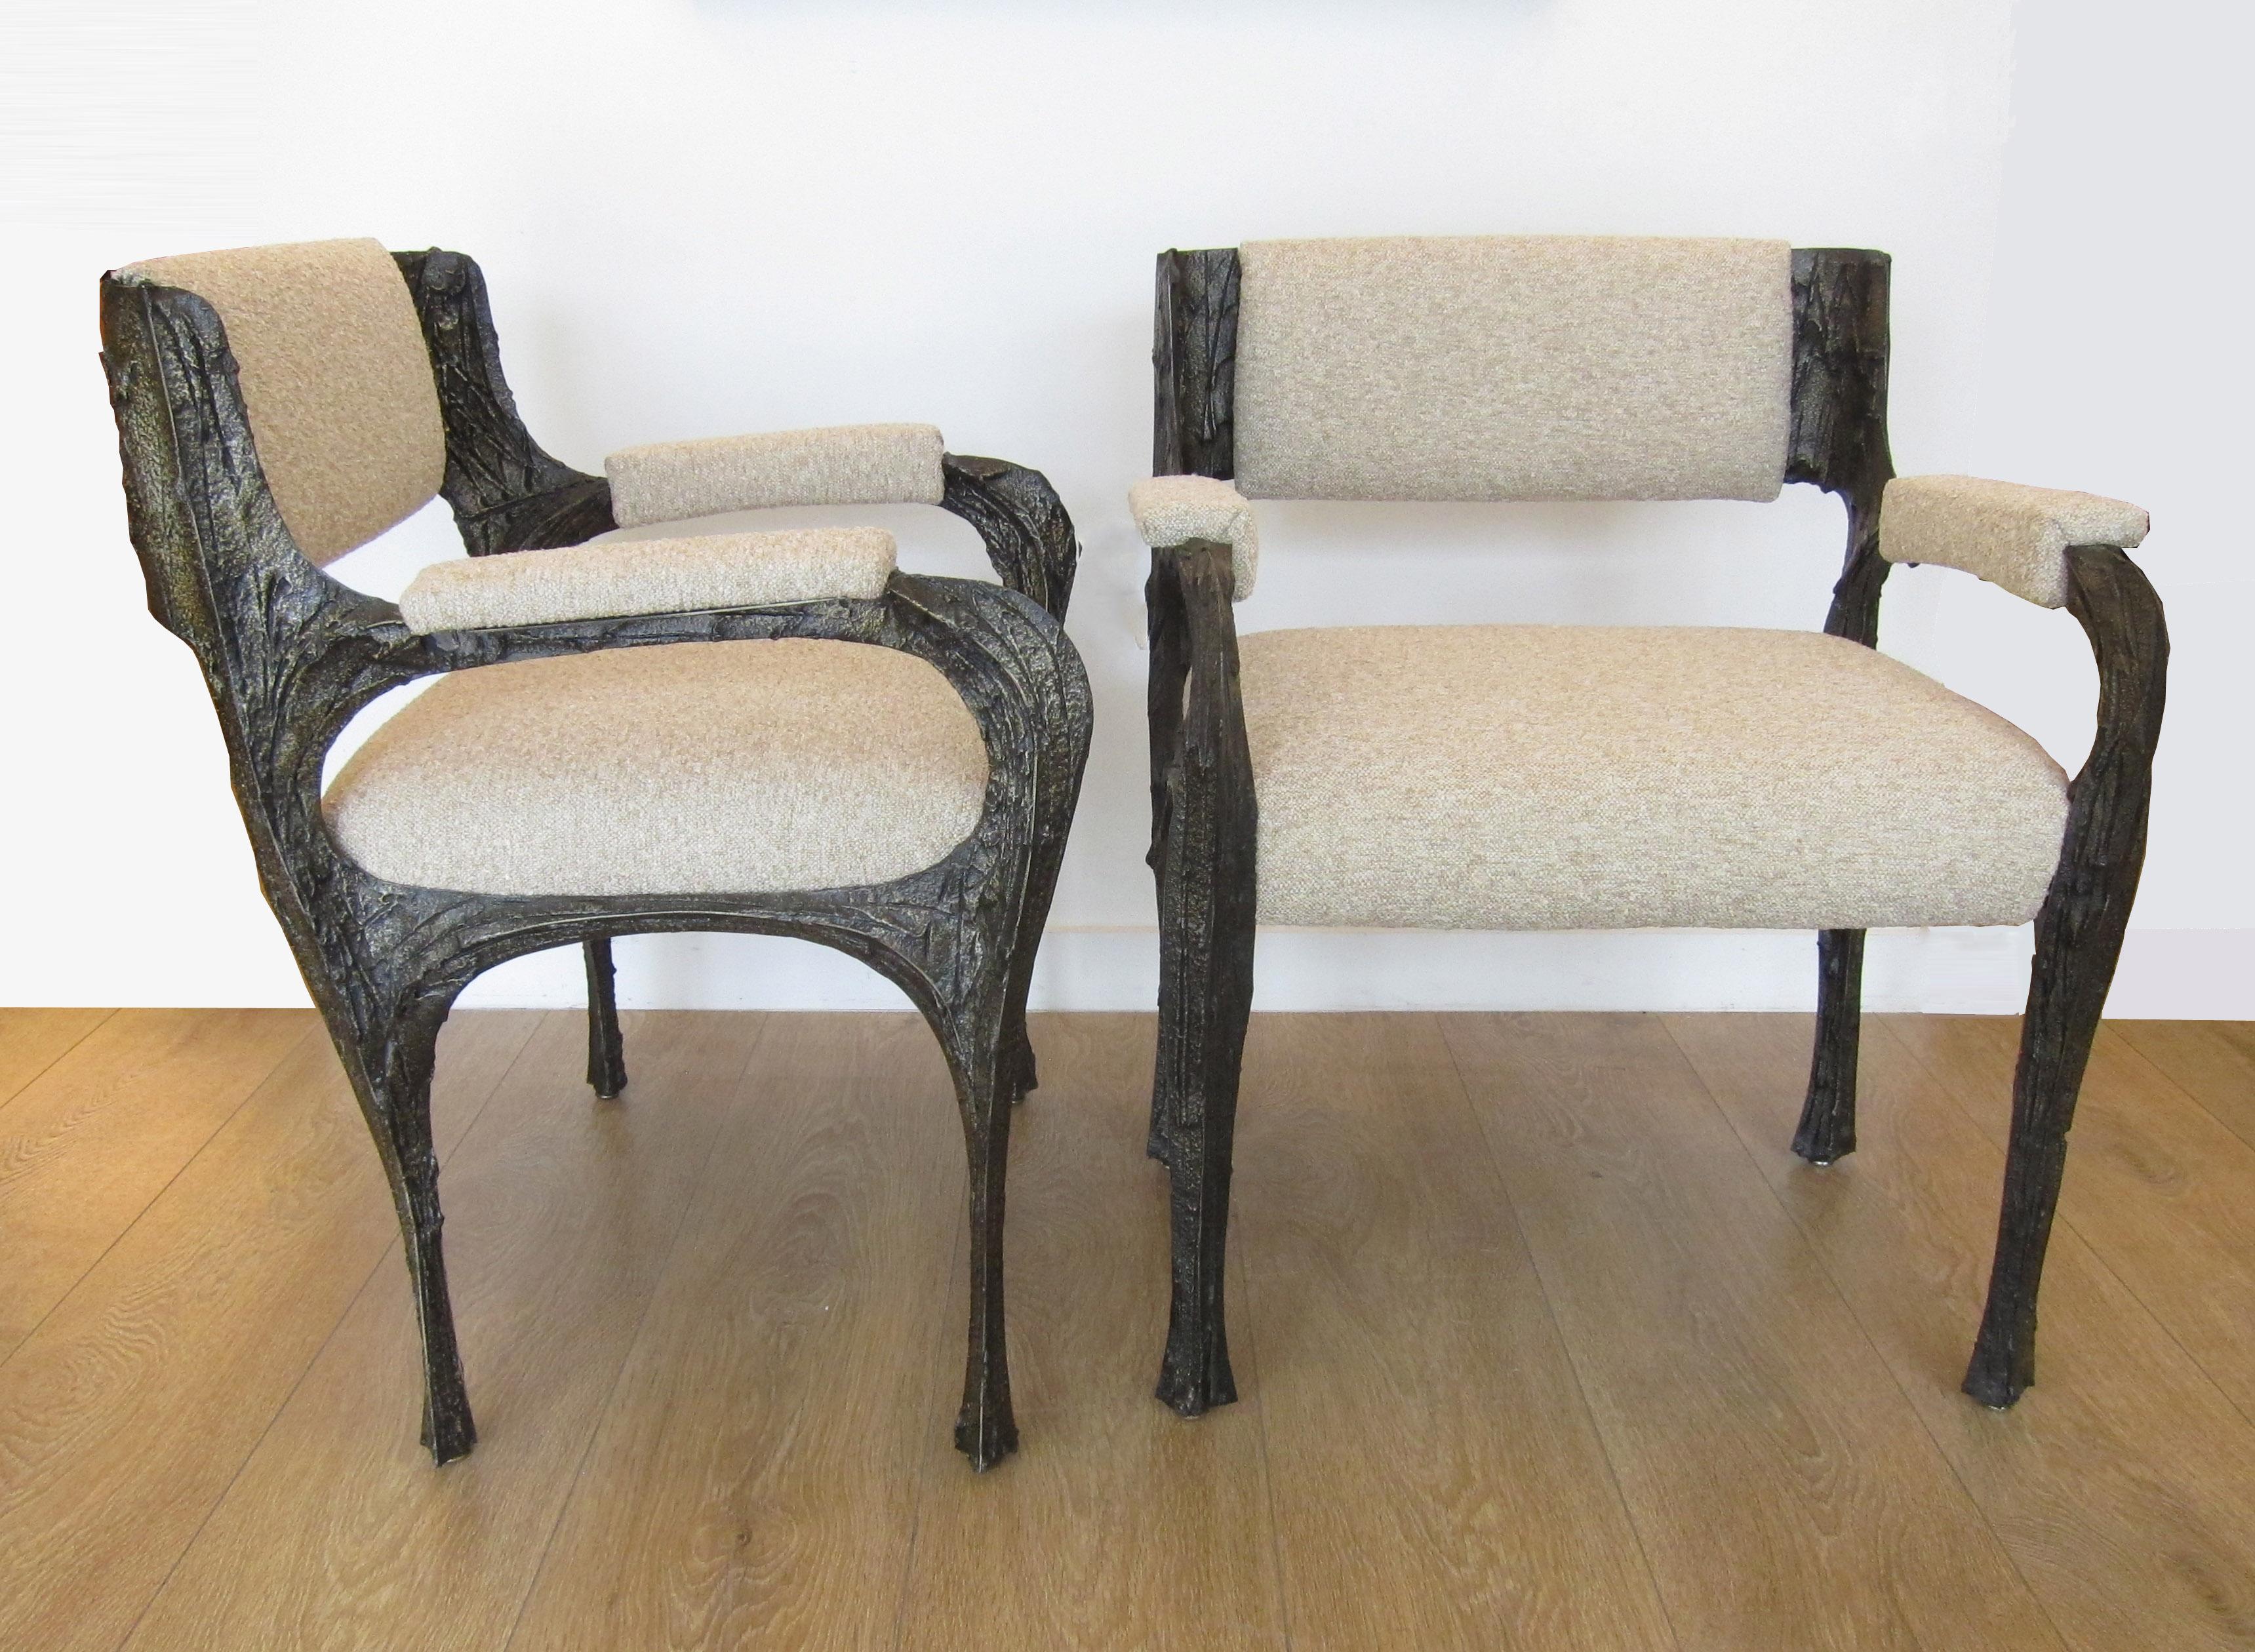 Paul Evans set of twelve brutalist sculpted bronze dining chairs. This extremely rare to find set is comprised of two armchairs (Model PE 105) and ten side chairs (Model PE 106).
Newly upholstered with a heavy bouclé fabric.
References and